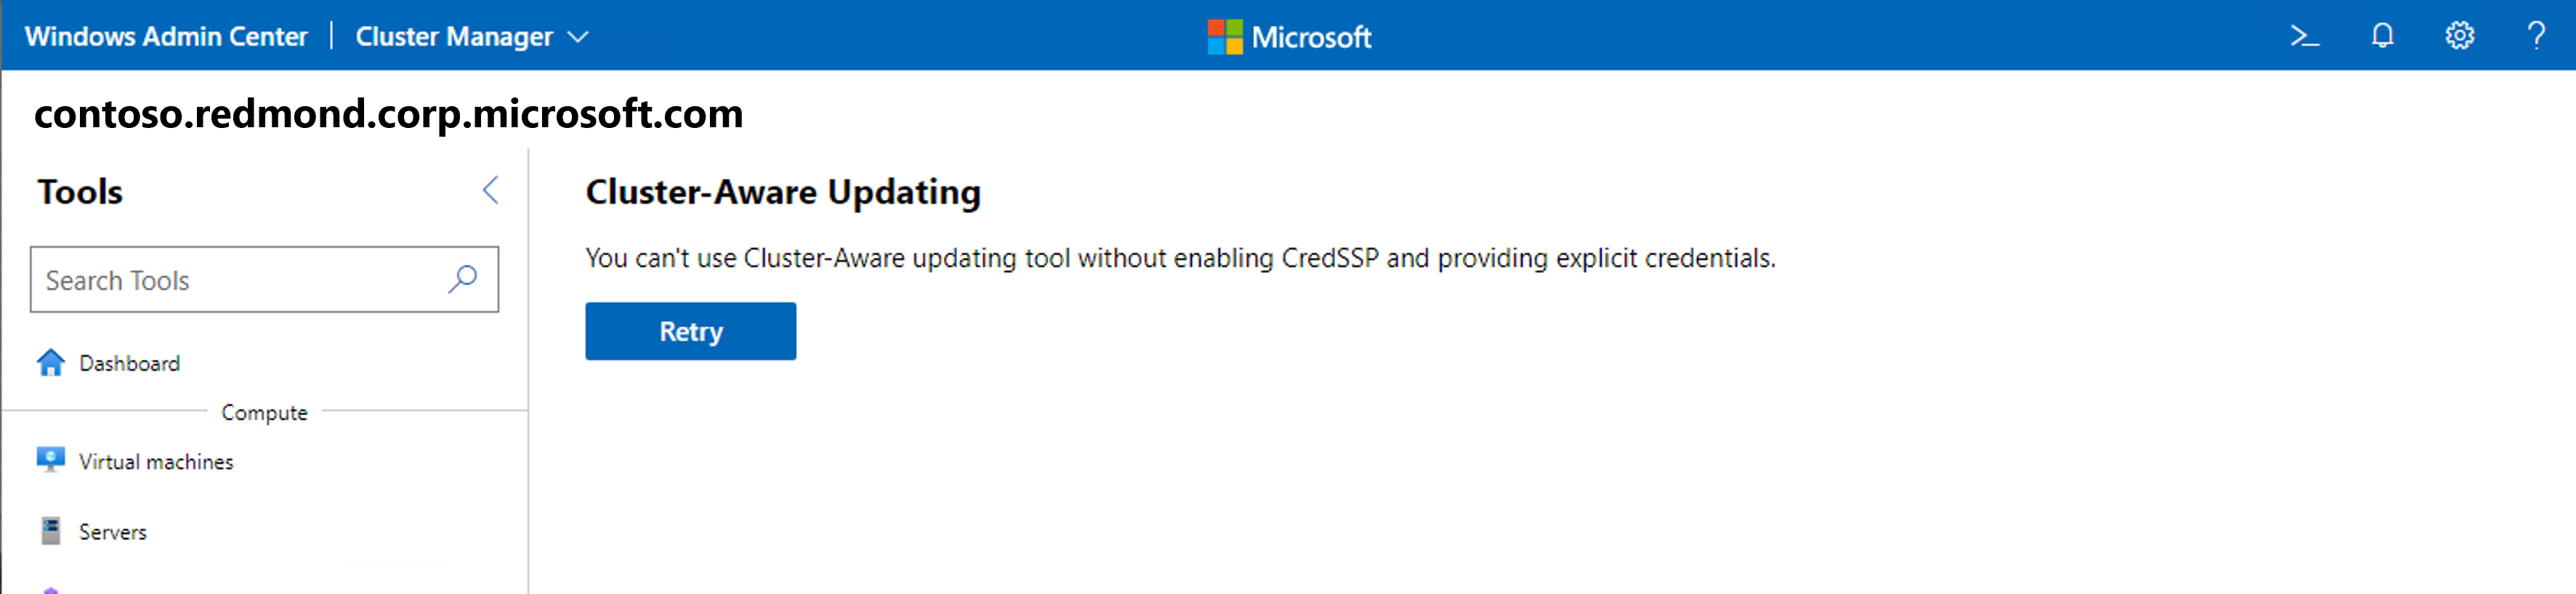 A screenshot of the Cluster-Aware updating tool displaying the Cred S S P error message.